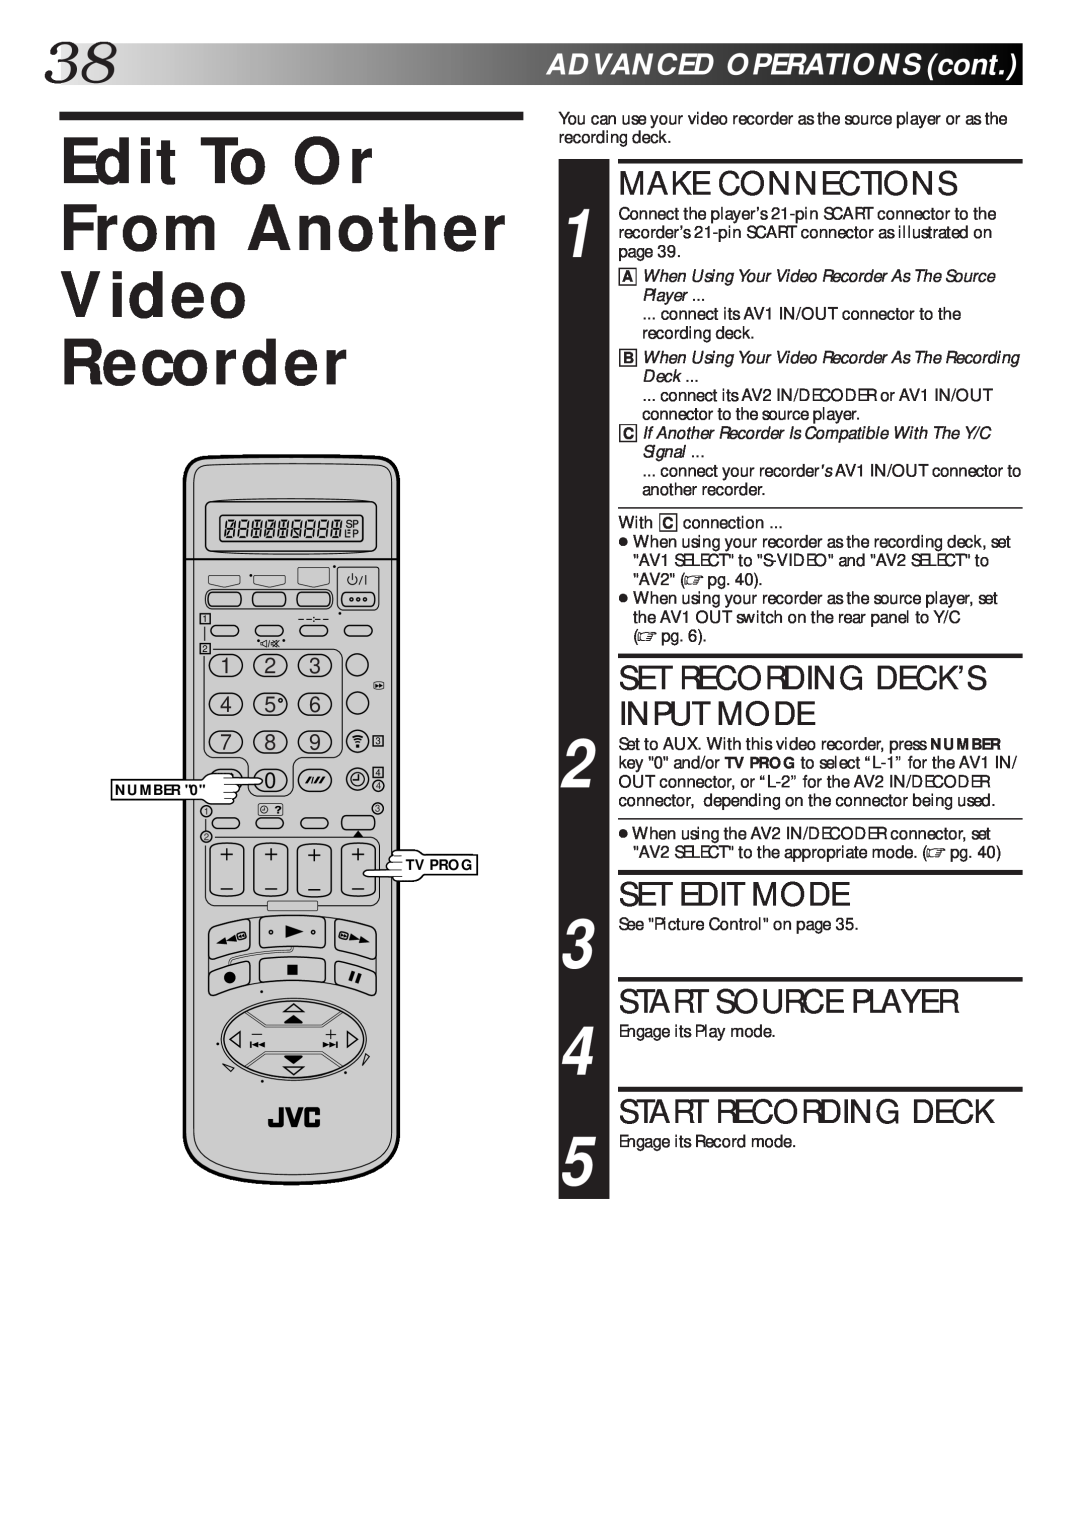 JVC HR-S9600EK Edit To Or From Another Video Recorder, Make Connections, Set Recording Deck’S, Input Mode, Set Edit Mode 